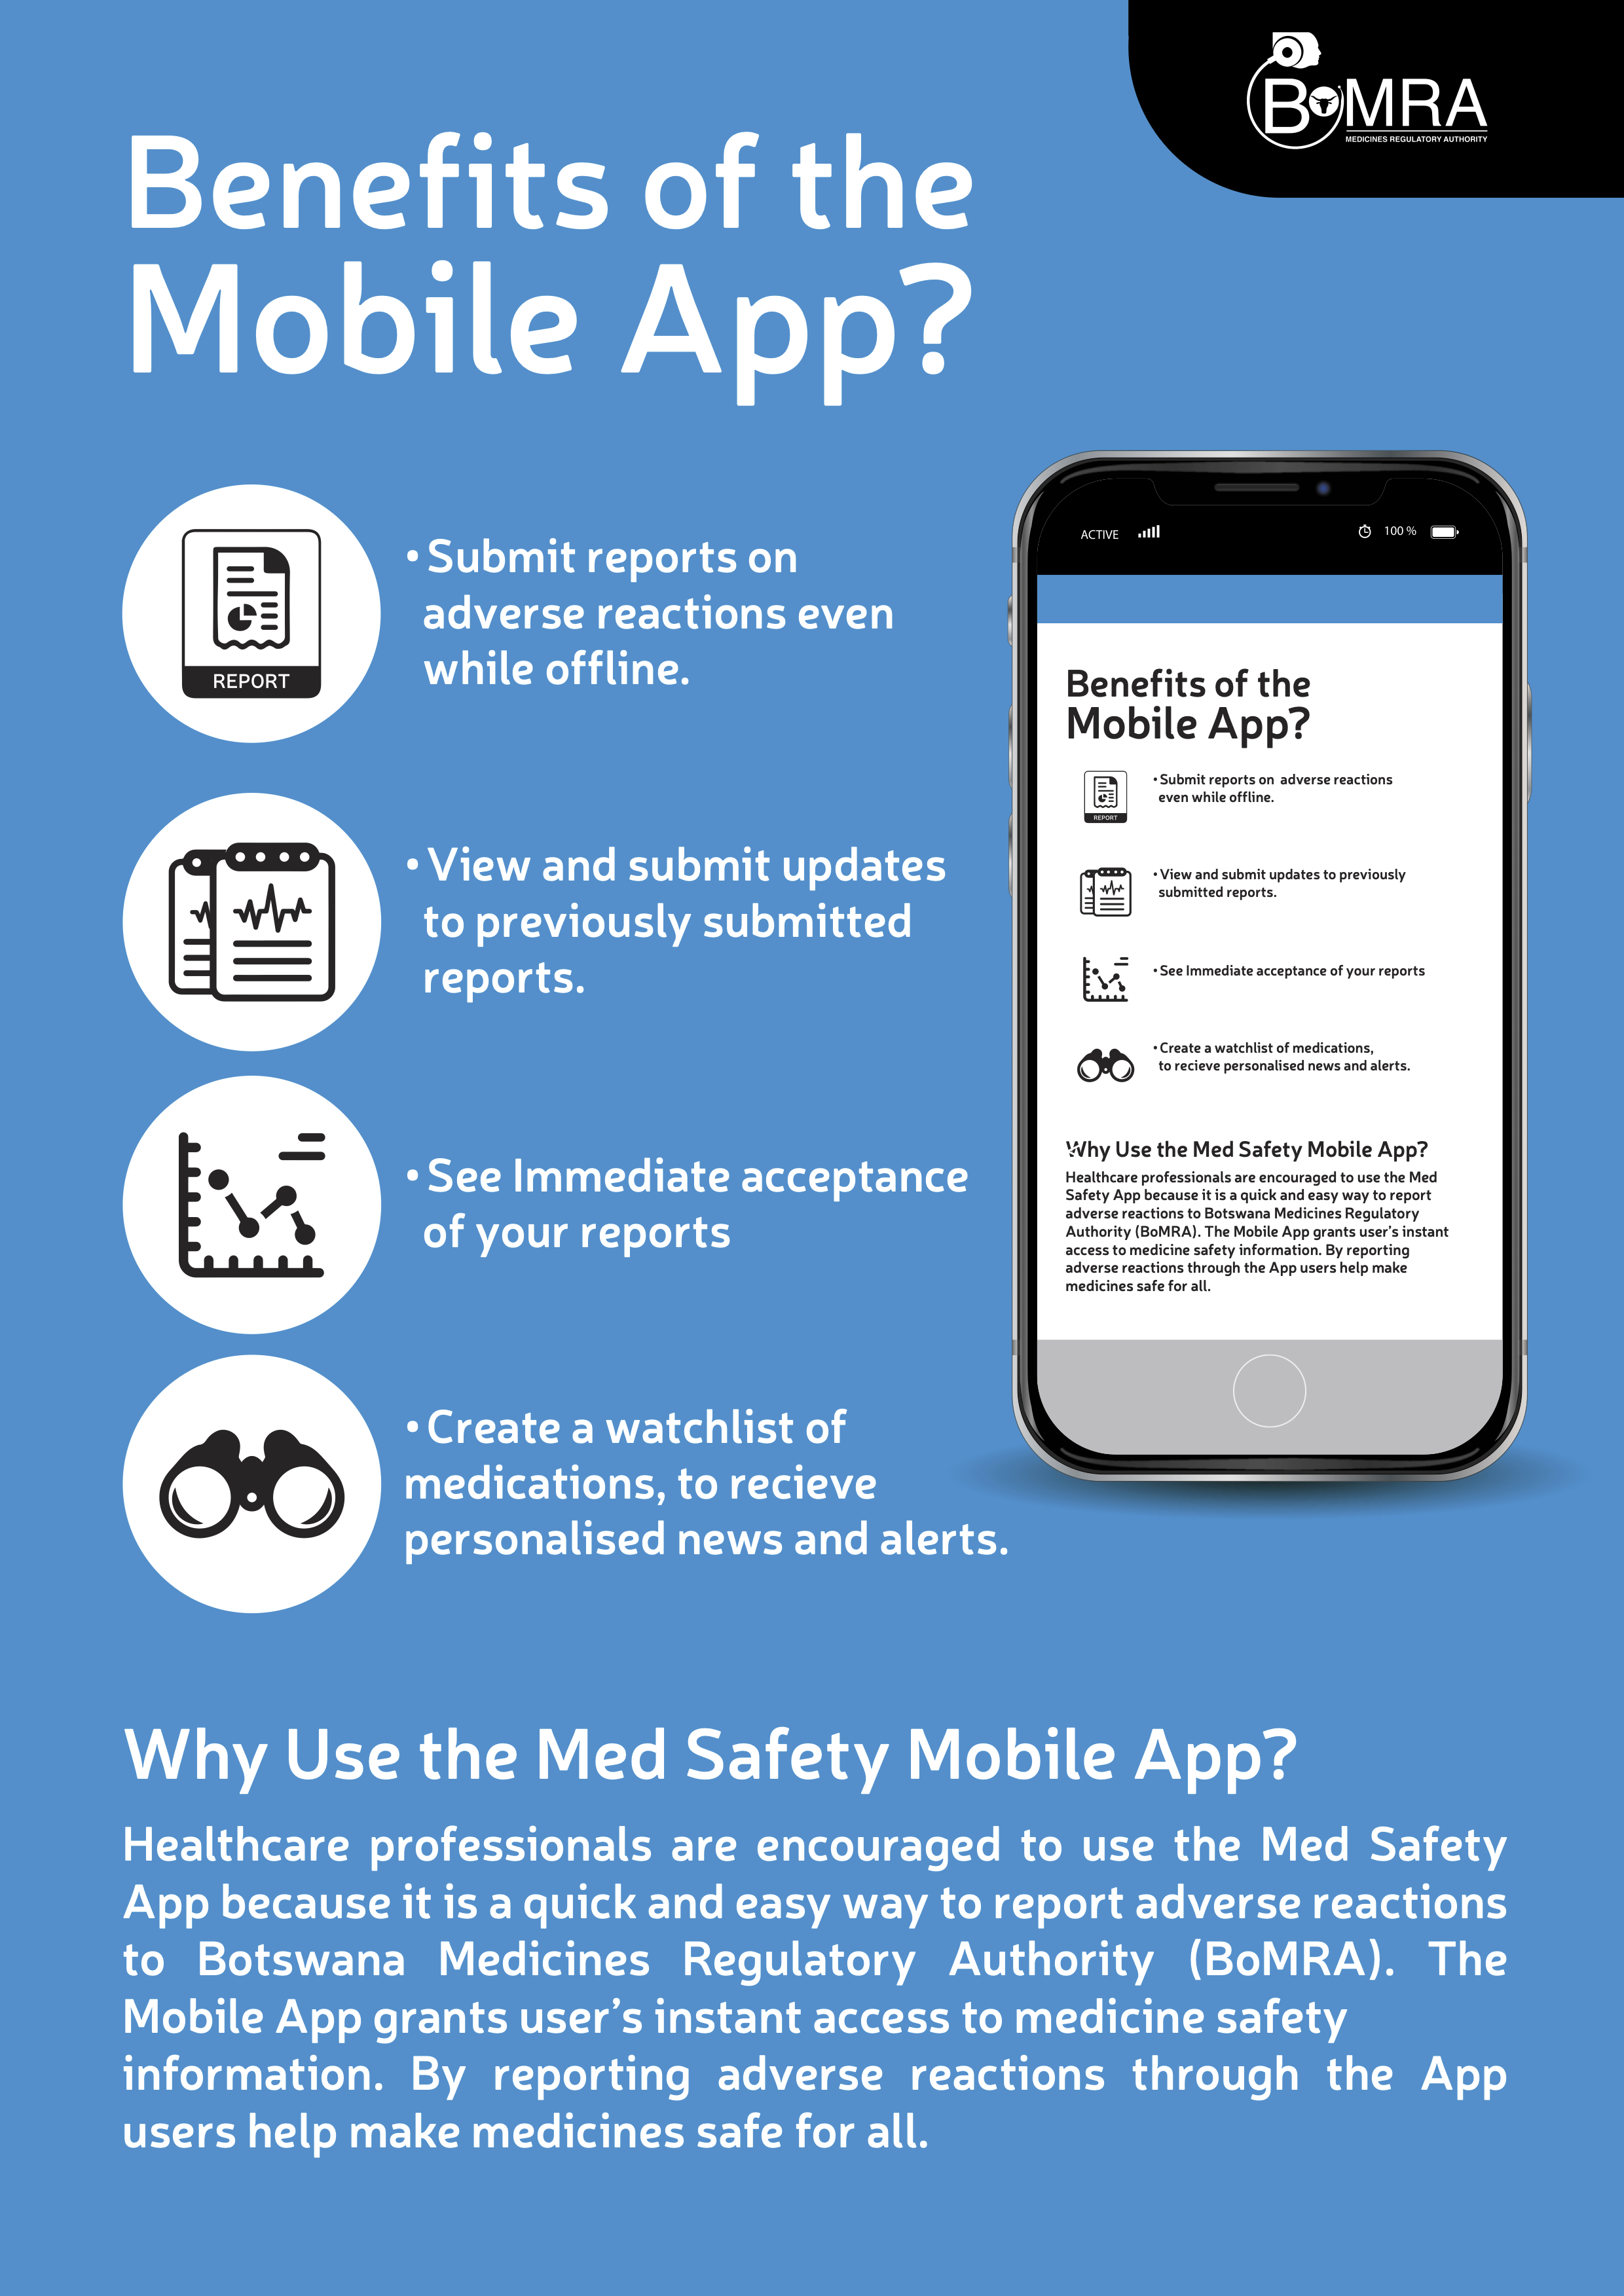 The Med Safety App provides a simple interface for submitting and viewing reports.